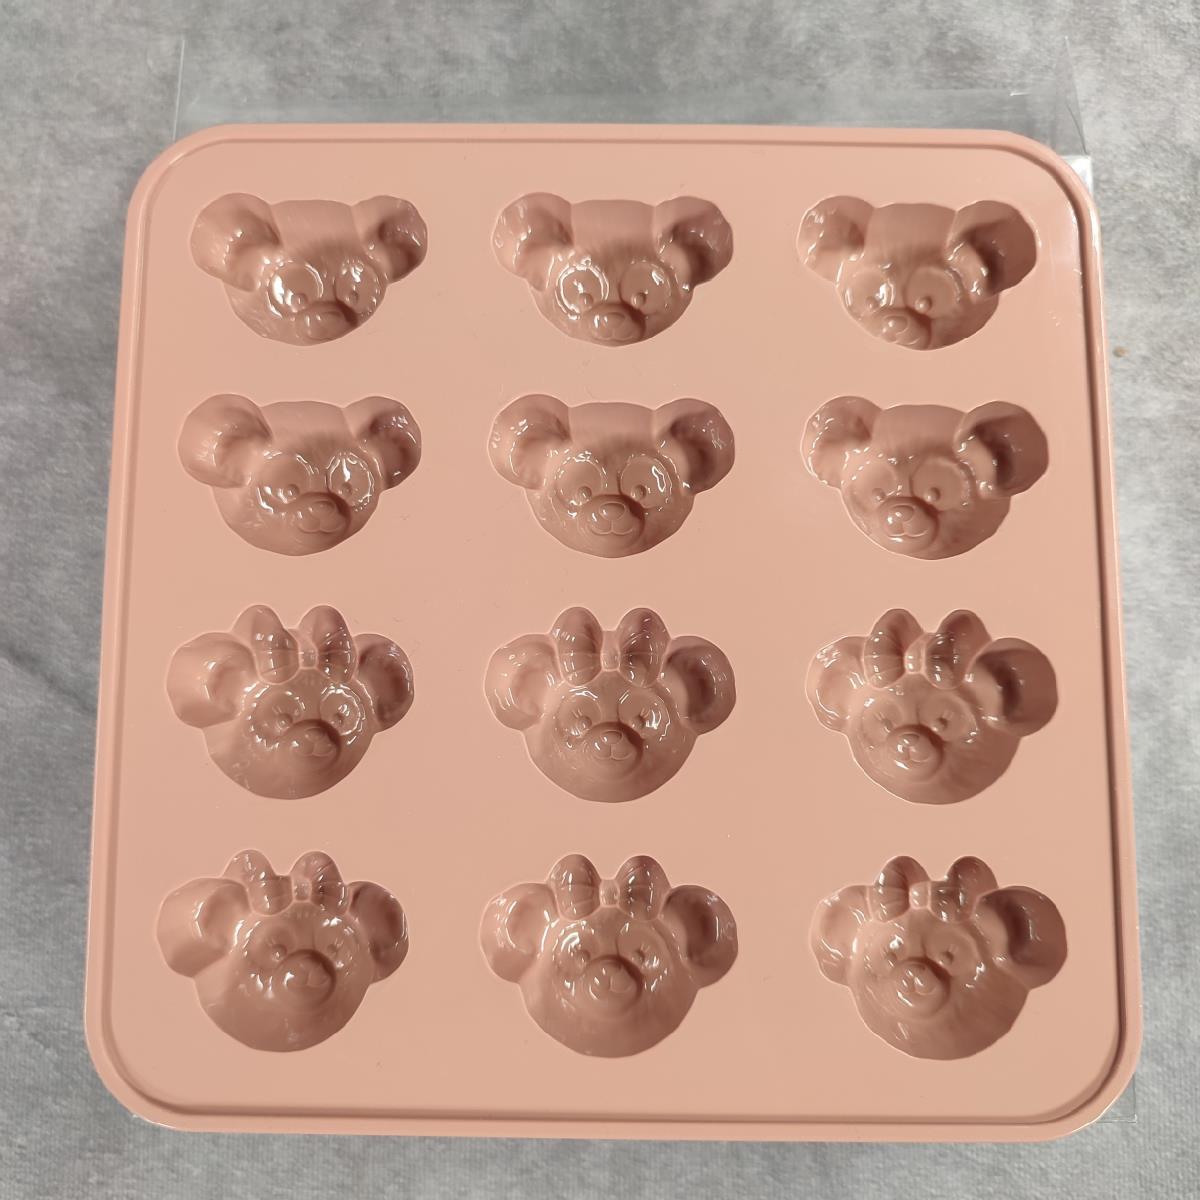  Duffy Shellie May silicon mold chocolate ice ice type kitchen articles Disney Land si- secondhand goods 